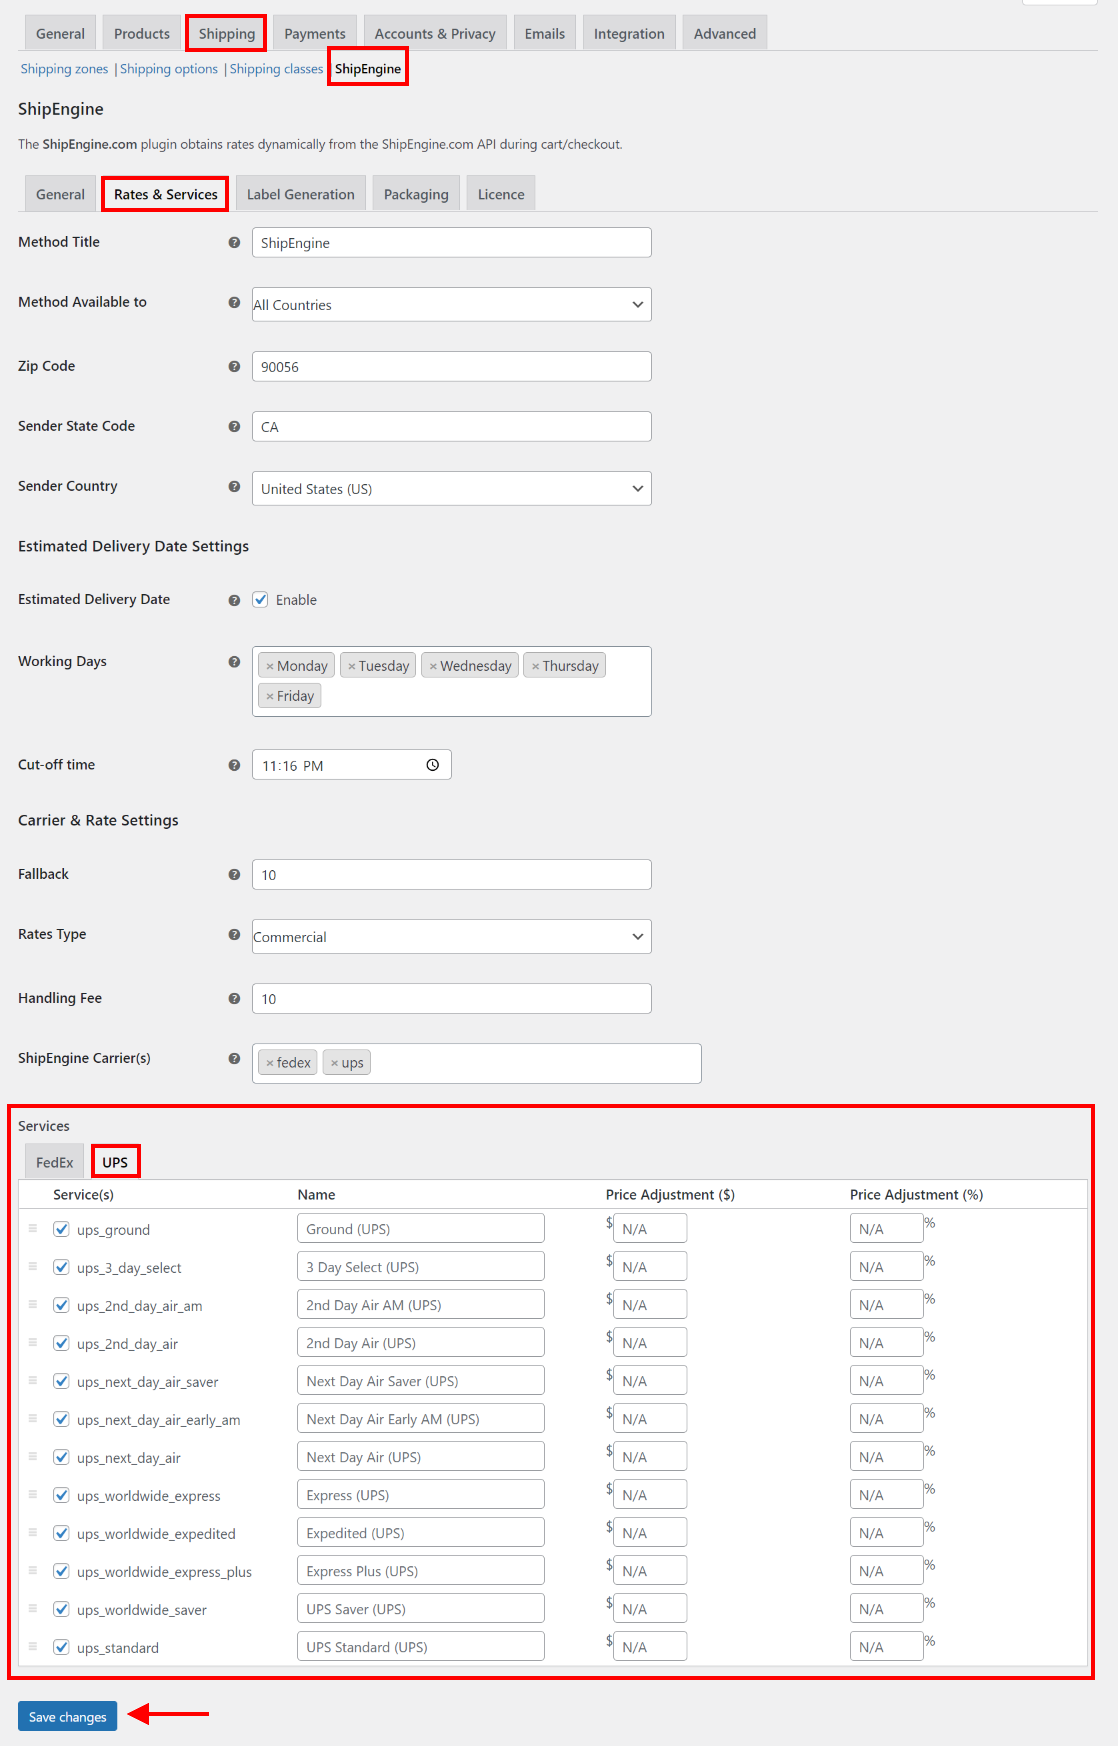 Add a custom method title if necessary and provide the sender's shipping information on the Rates and Services tab.